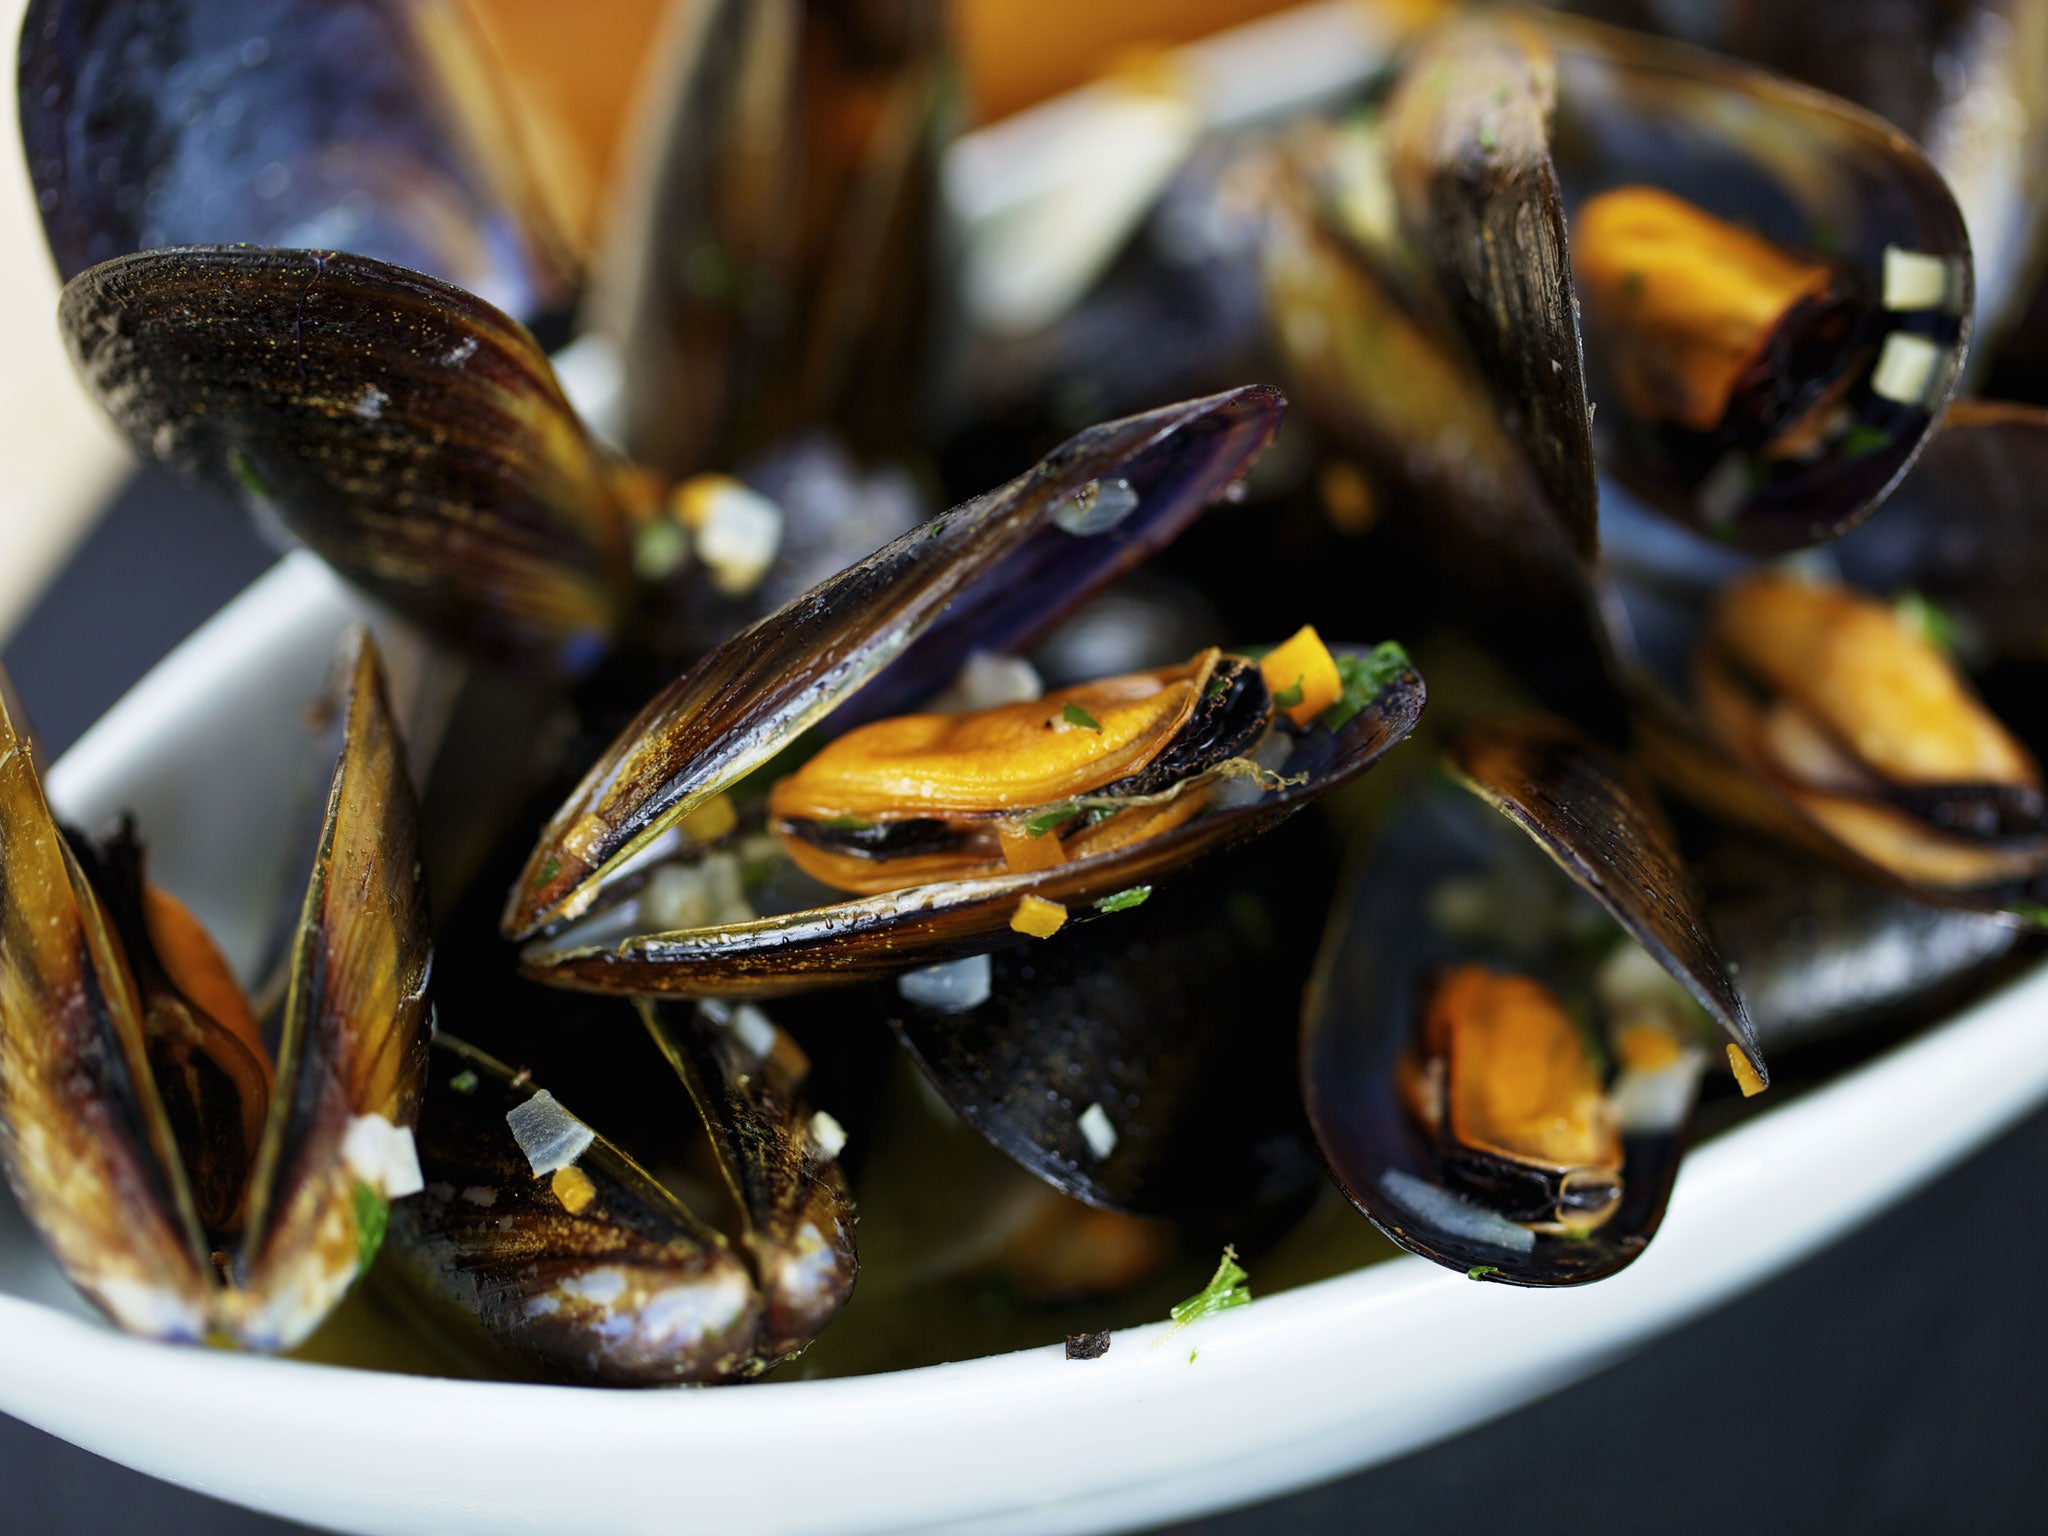 The Food Standards Agency (FSA) has confirmed that three M&S home-brand mussels products have been taken off the shelves and "should not be consumed".